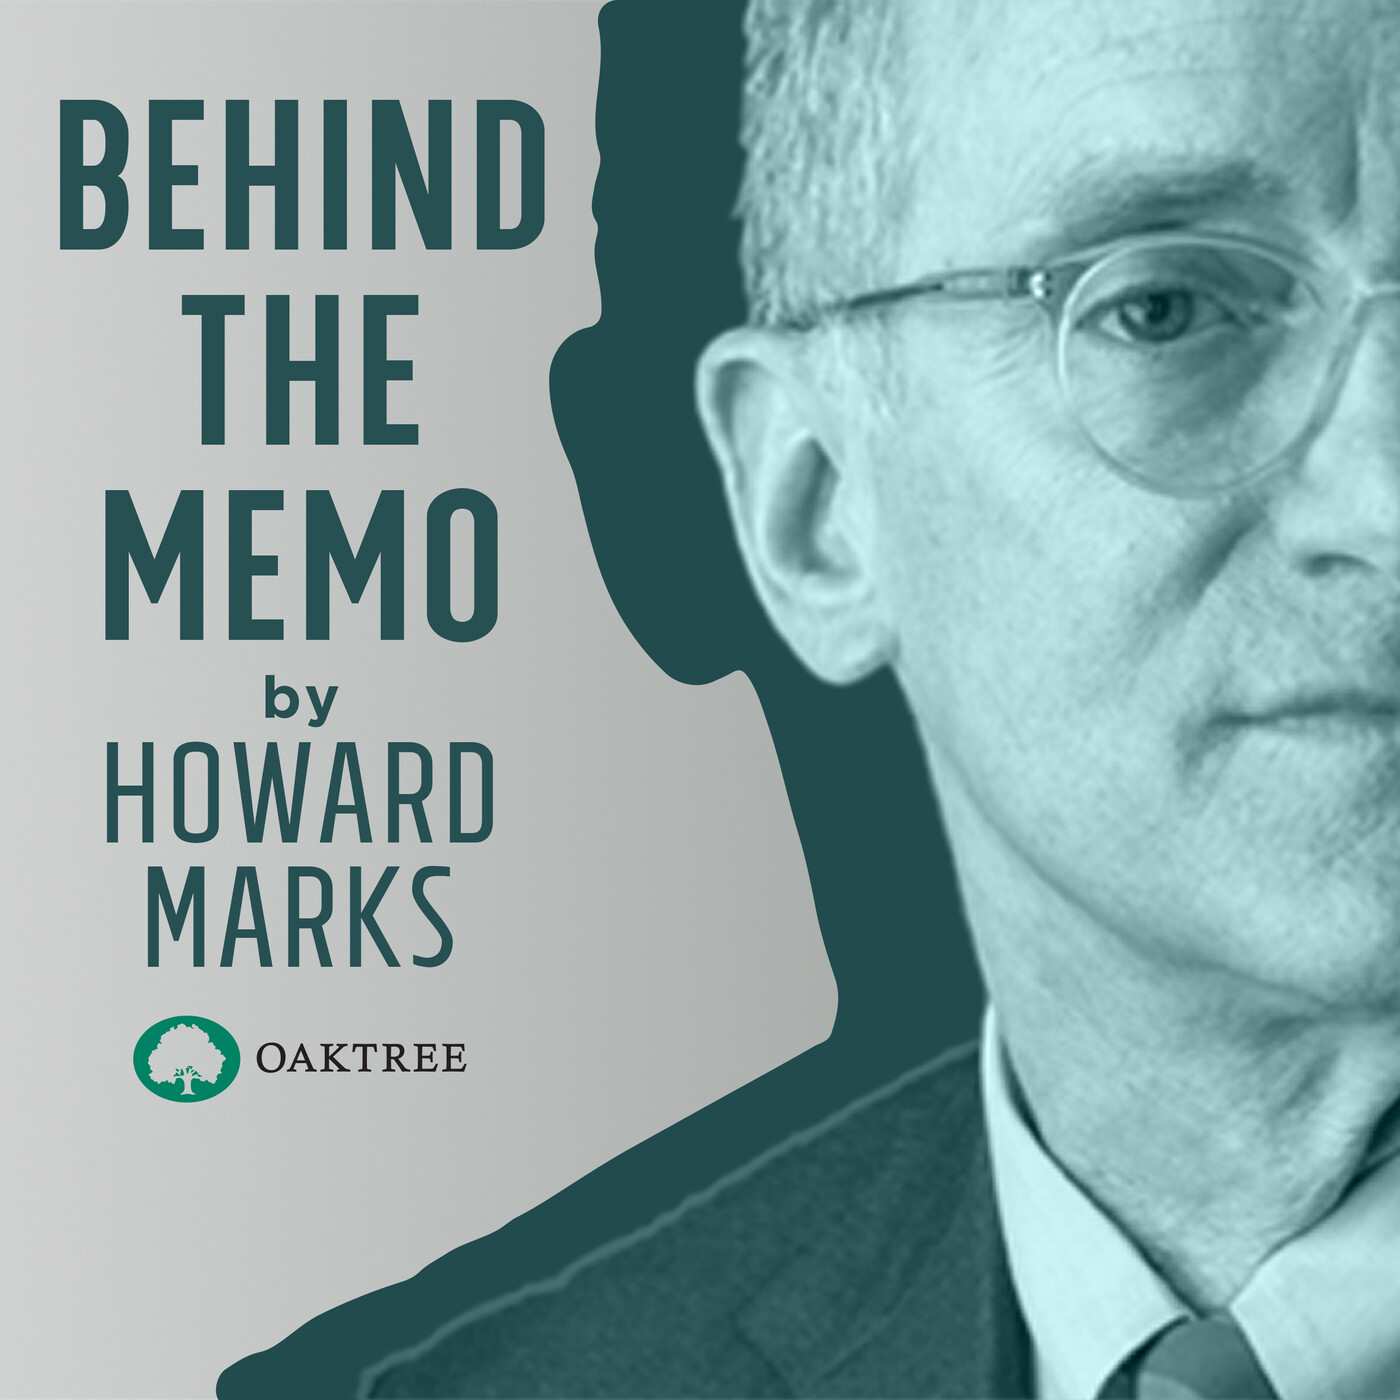 Behind The Memo: What Really Matters?